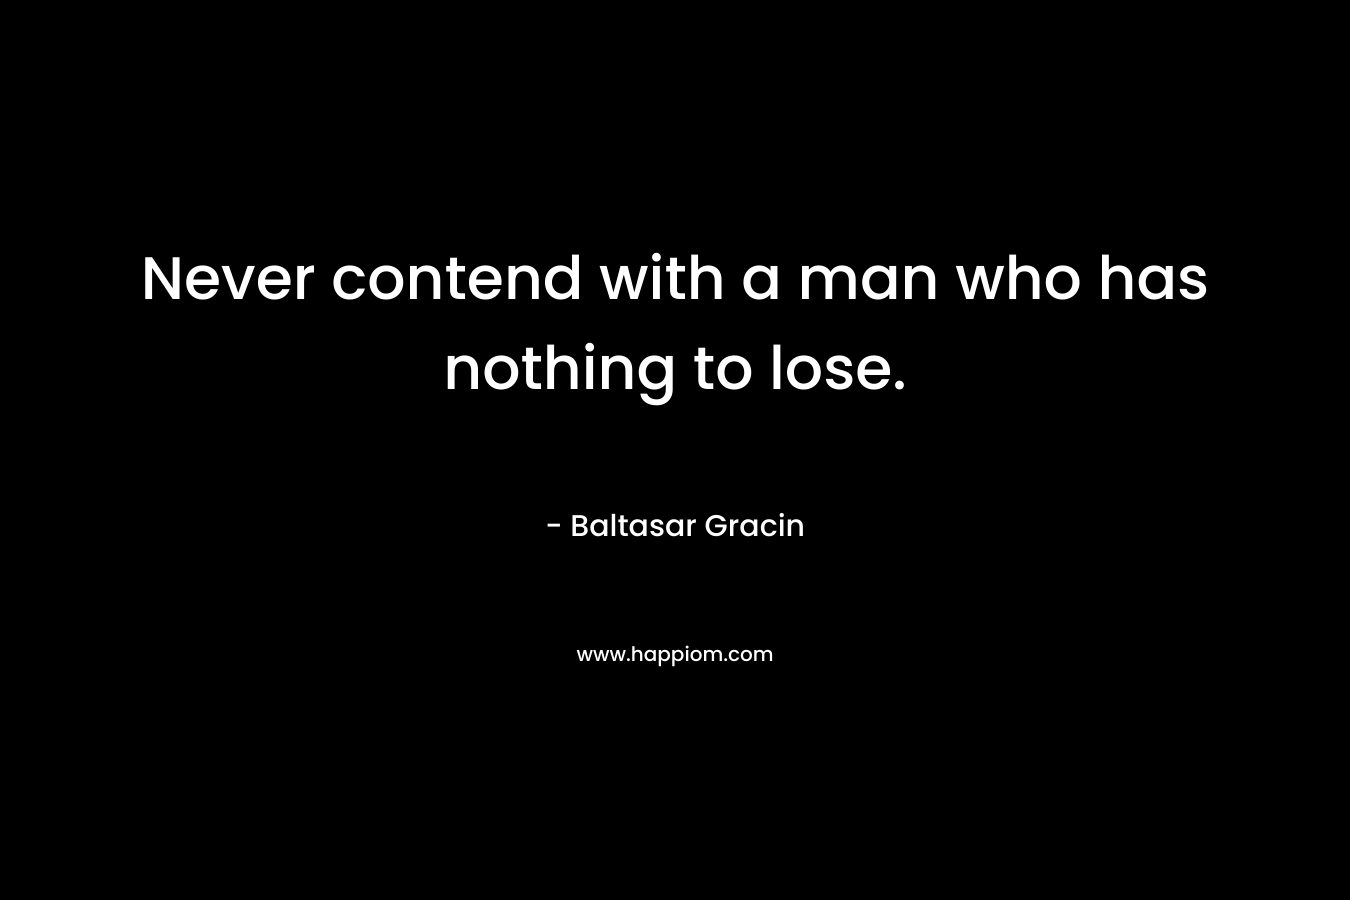 Never contend with a man who has nothing to lose. – Baltasar Gracin